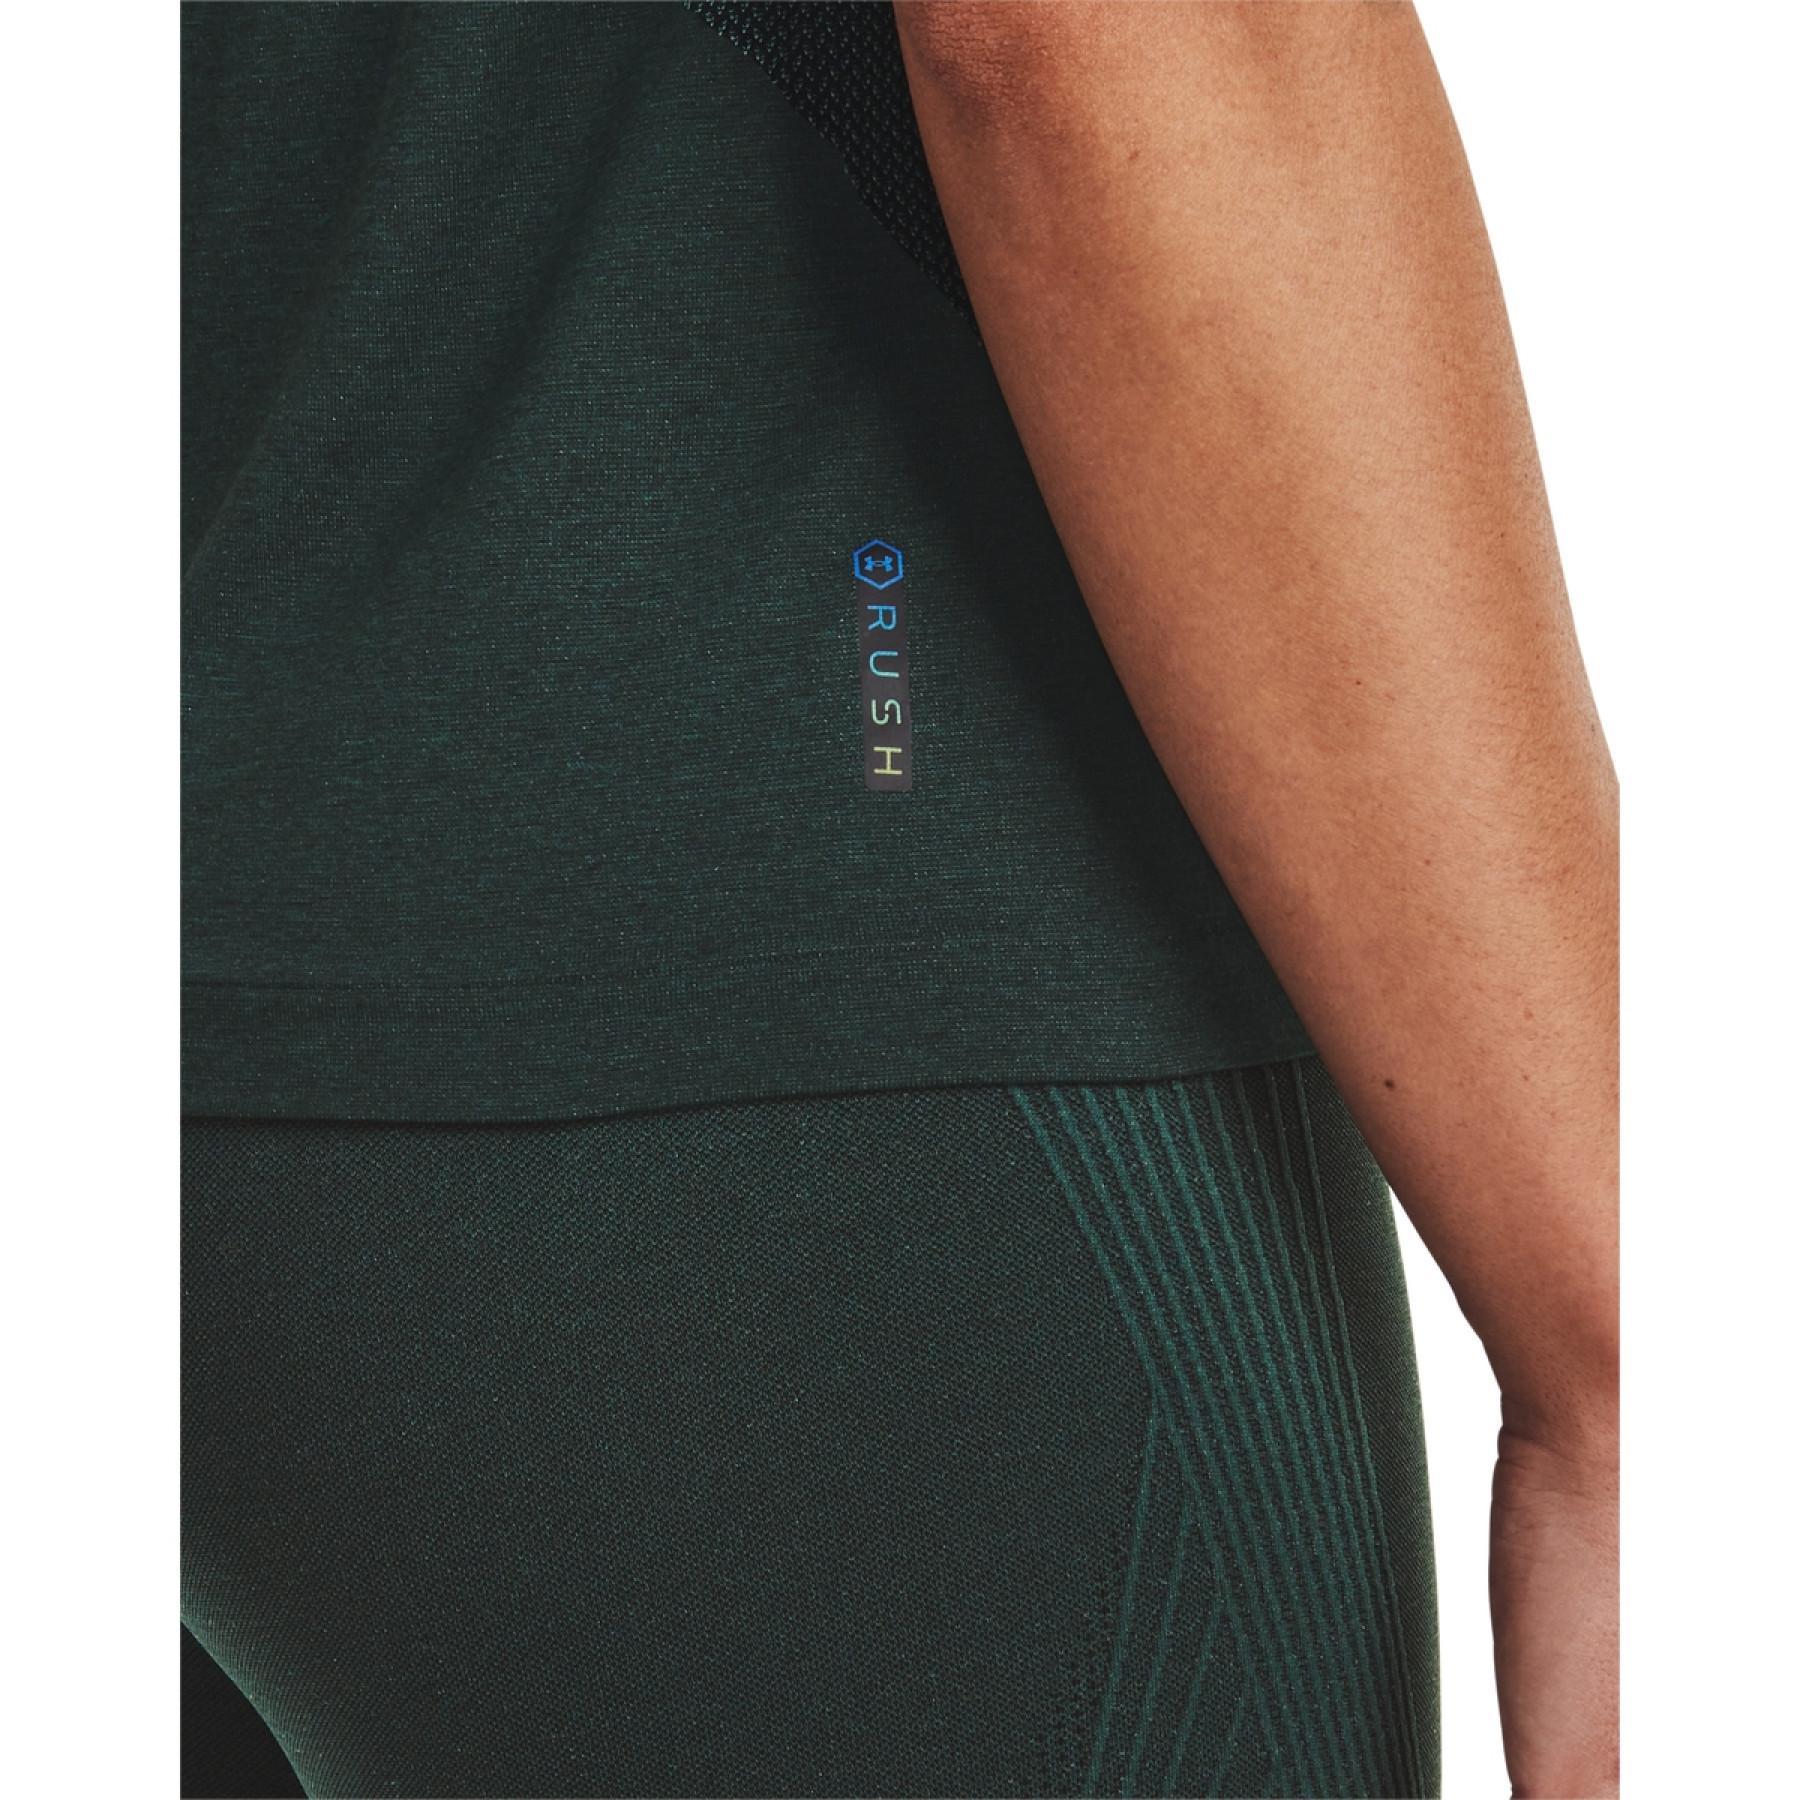 Women's jersey Under Armour à manches courtes rush Seamless